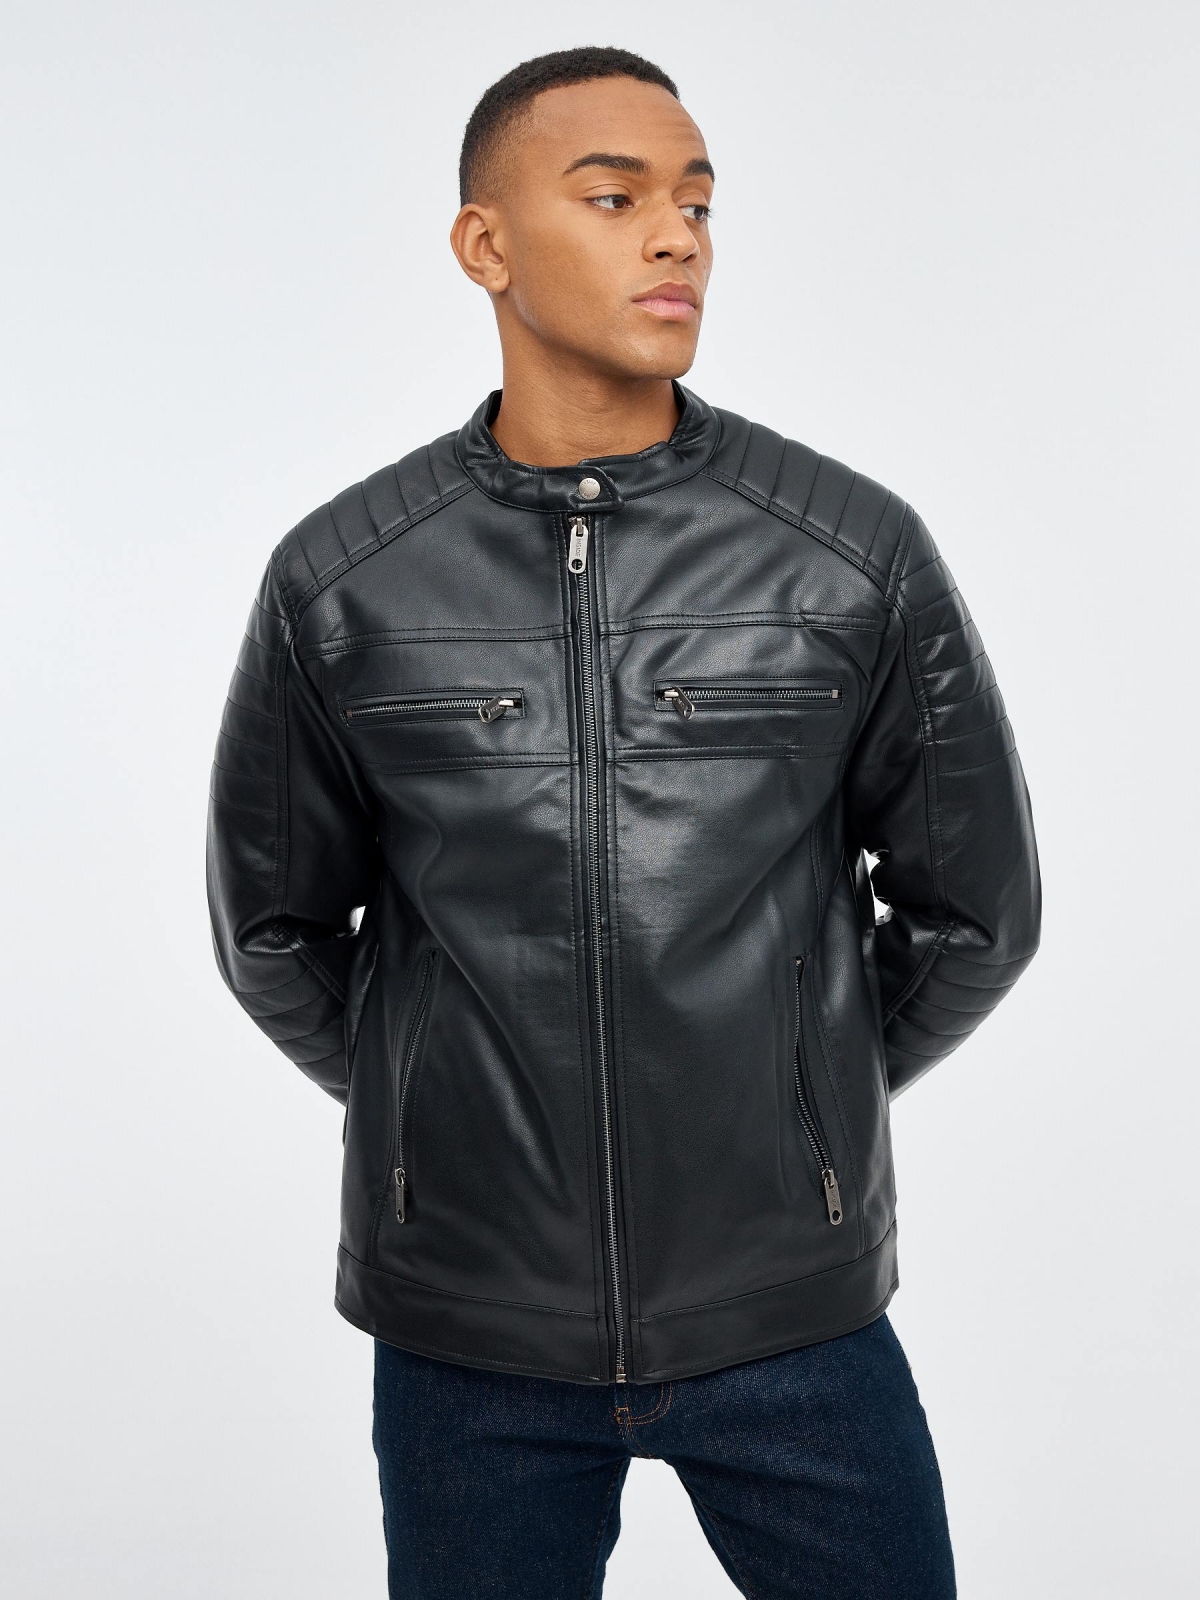 Black leather effect jacket black middle front view